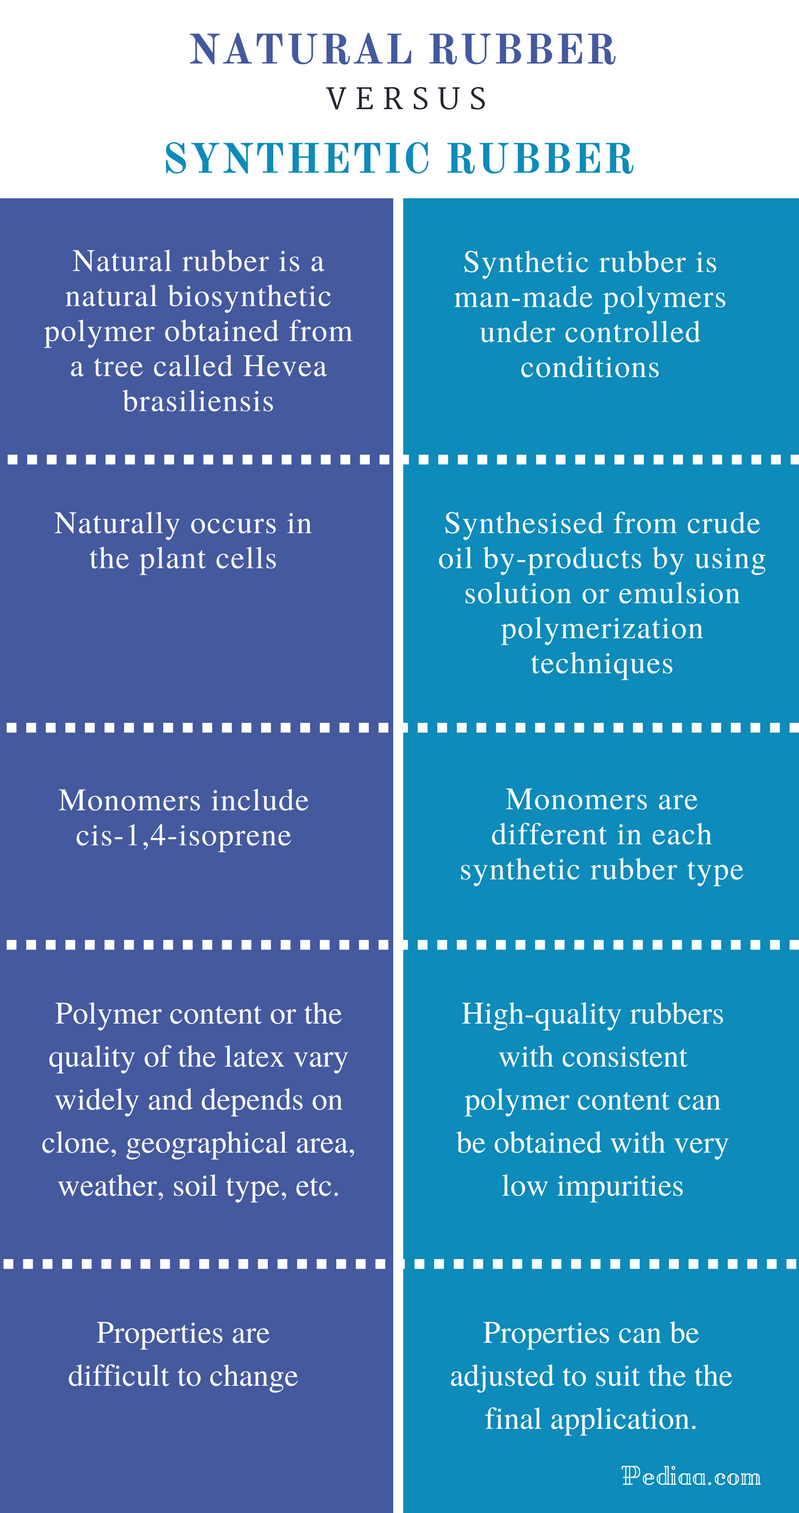 Difference Between Natural Rubber and Synthetic Rubber - Comparison Summary